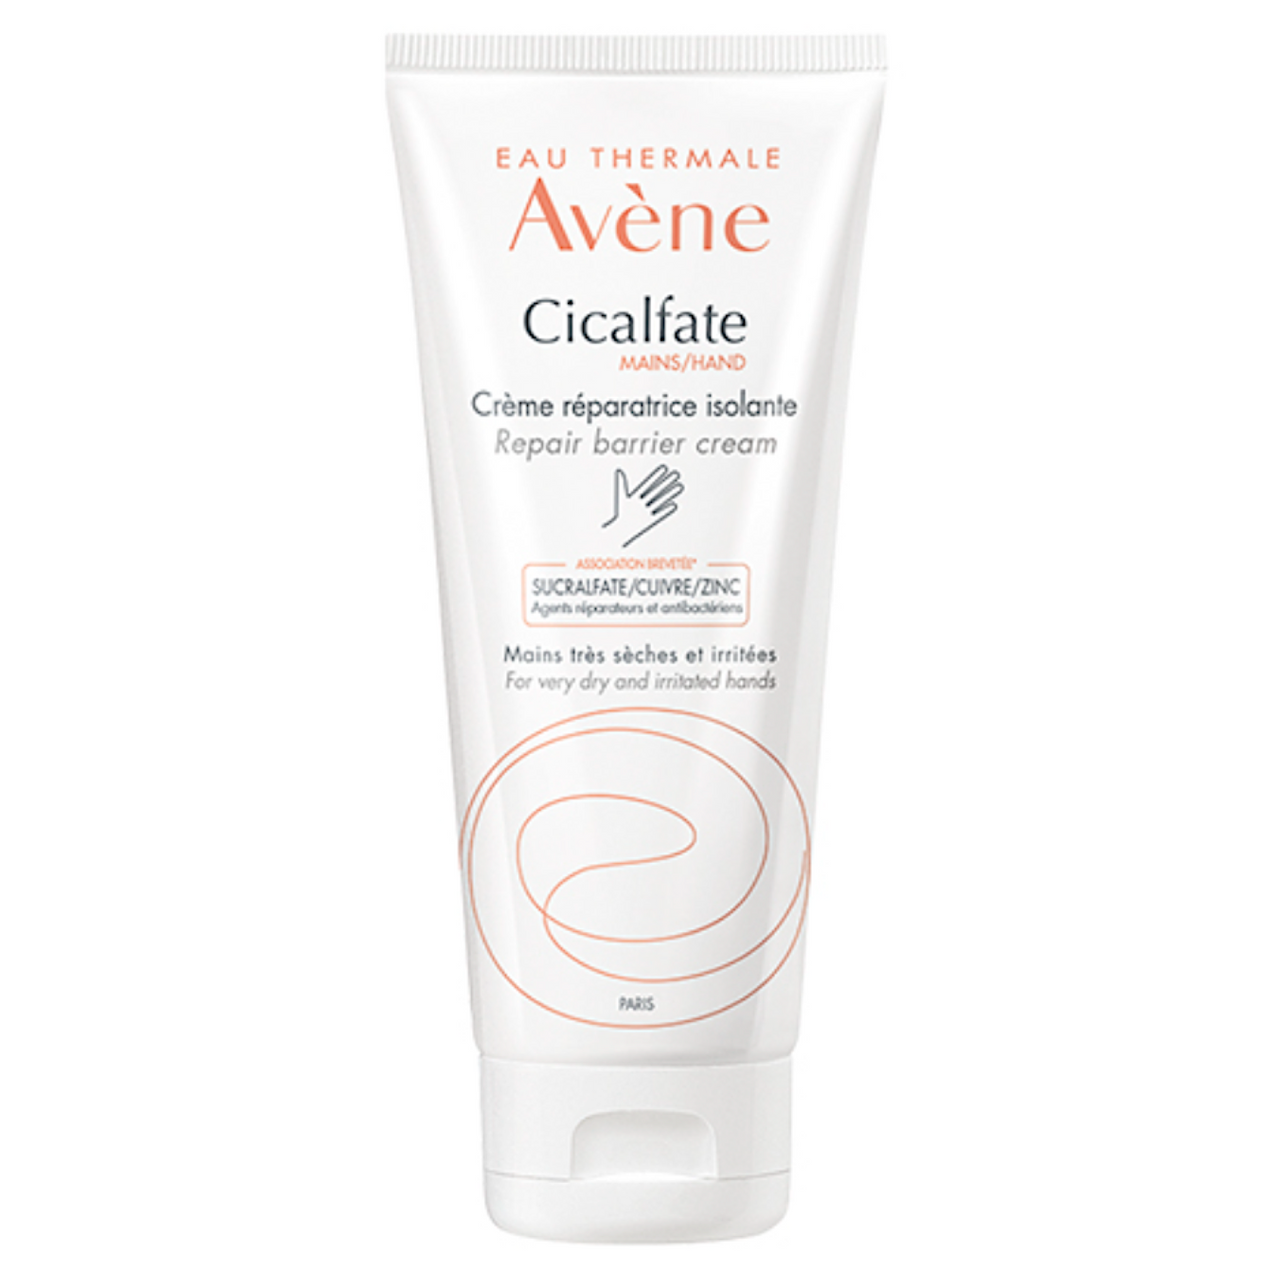 Avène Cicalfate Restorative Protective Cream used on Hand Foot Mouth Rash-  cleared FAST! 